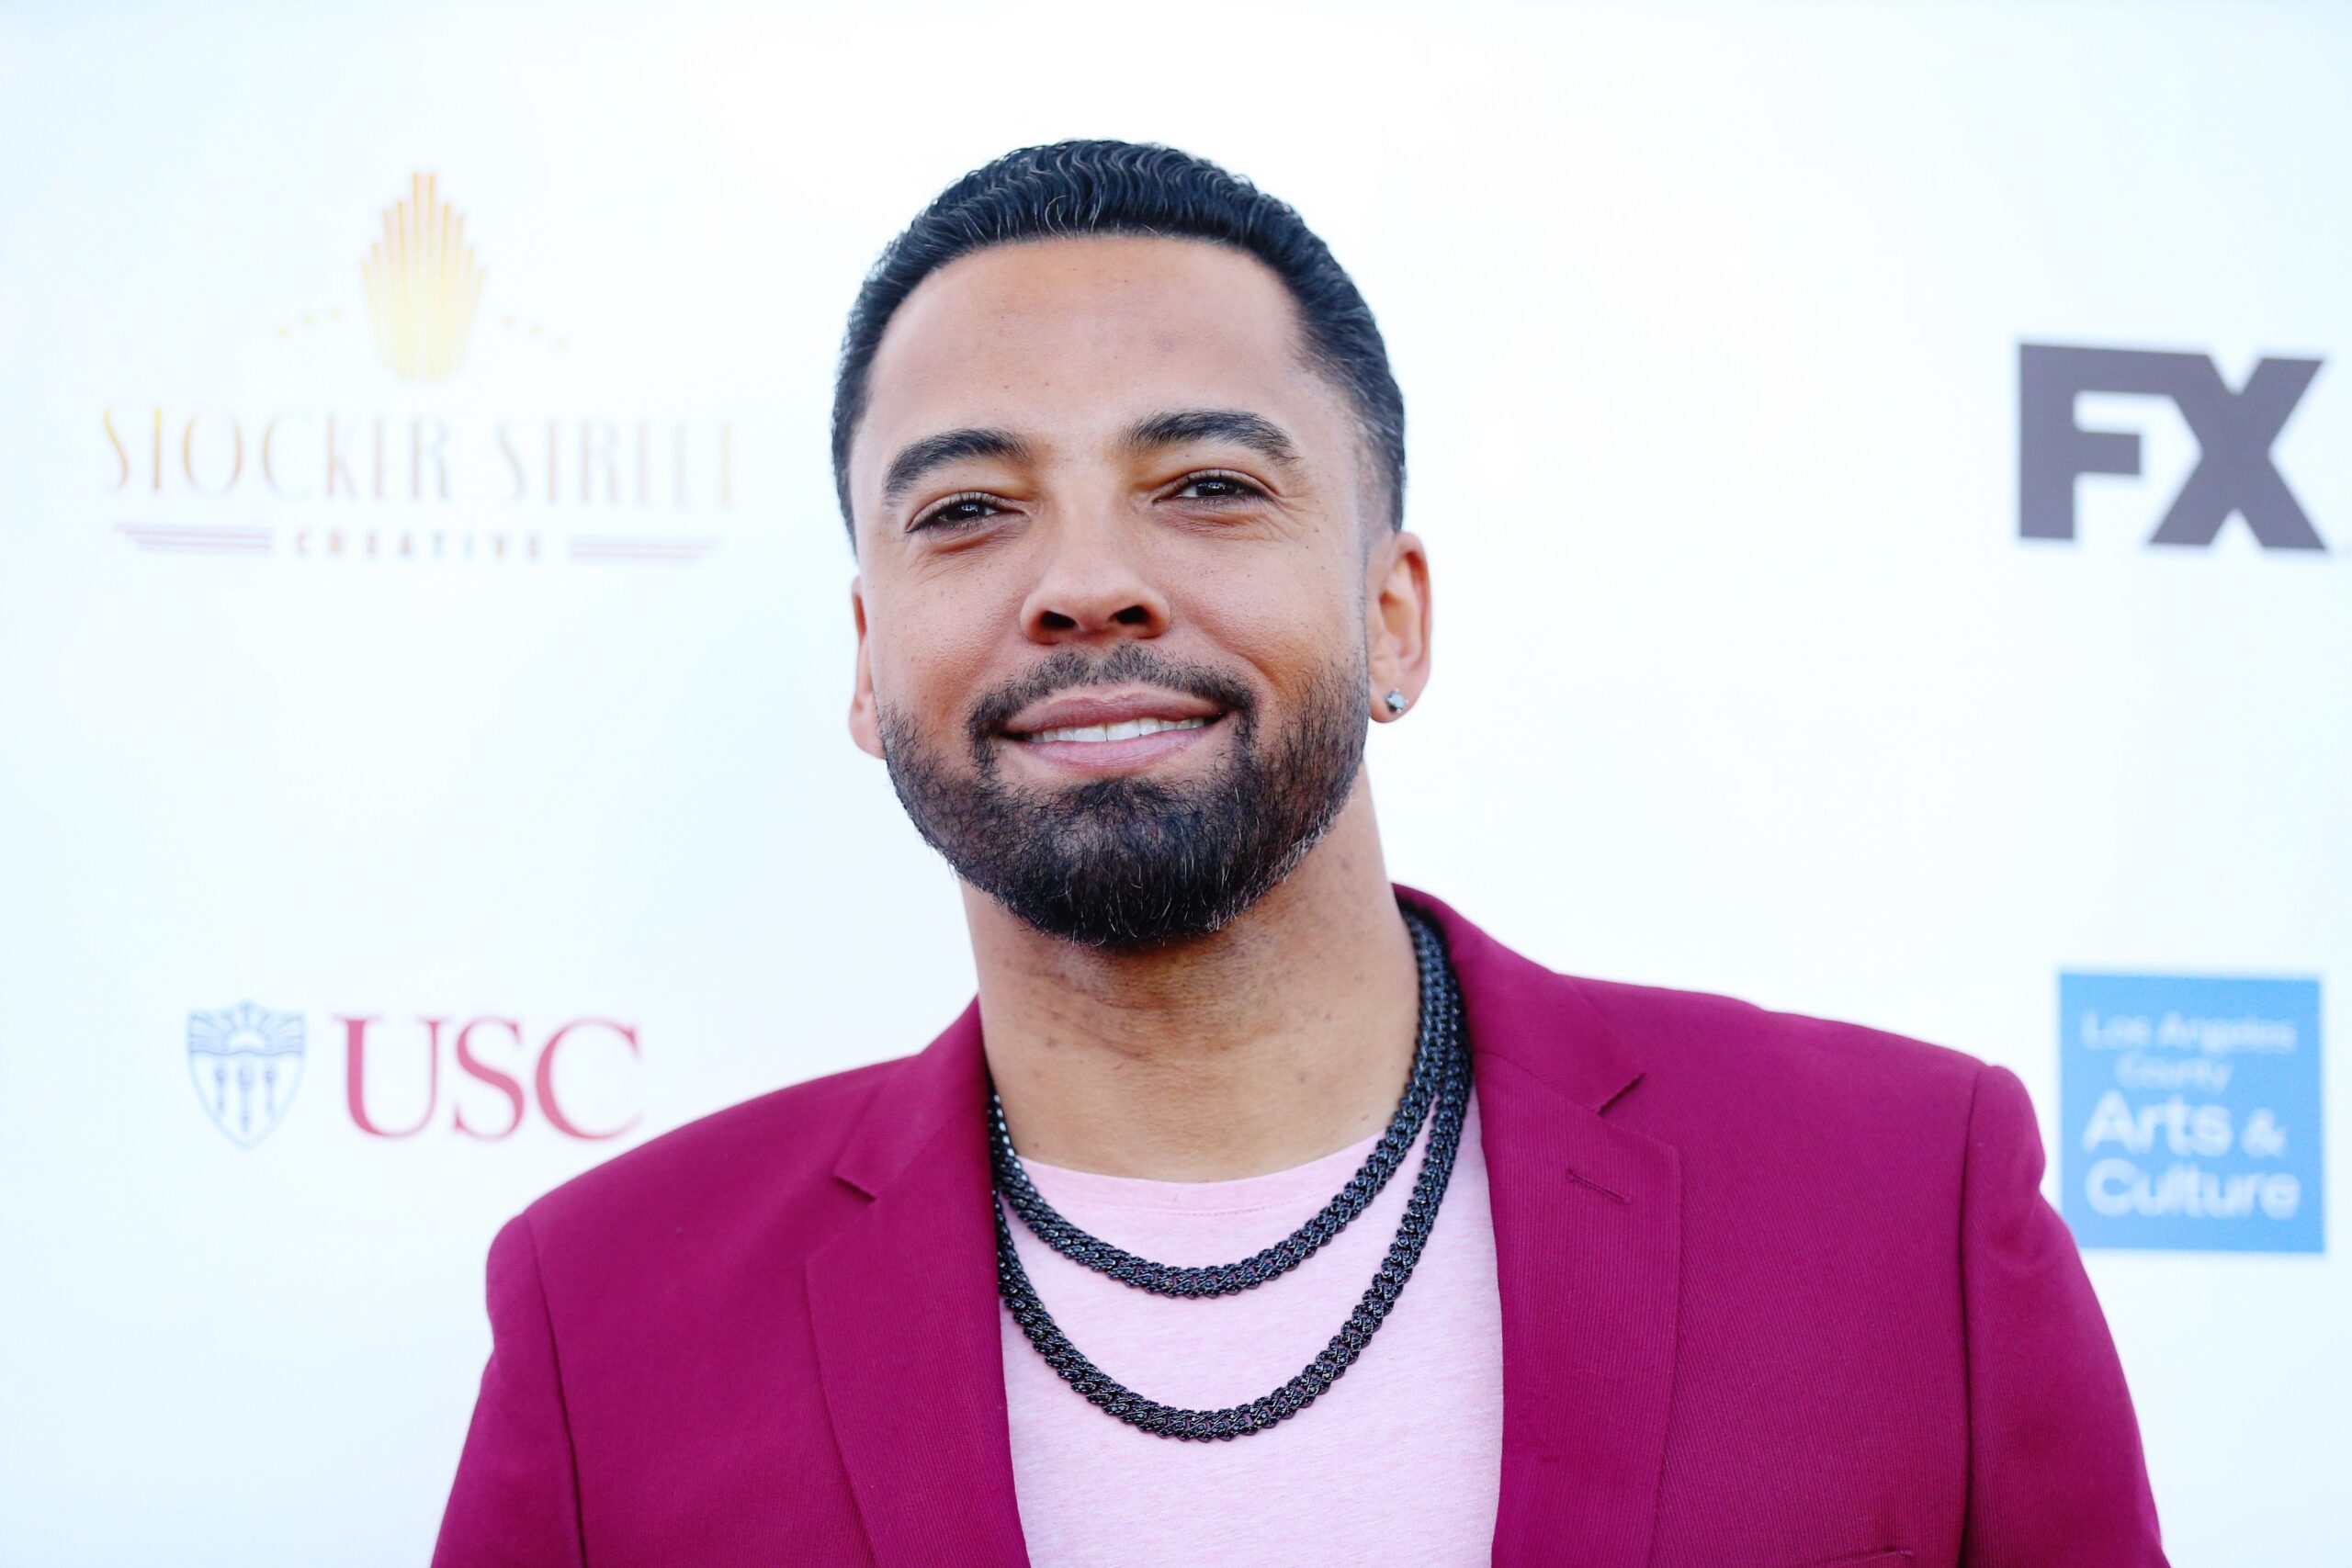 LOS ANGELES, CALIFORNIA - MAY 01: Christian Keyes attends the premiere of "Stalker", a TV One Original Film, at the Pan African Film Festival at Baldwin Hills Crenshaw Plaza on May 01, 2022 in Los Angeles, California. (Photo by Phillip Faraone/Getty Images for TV One)